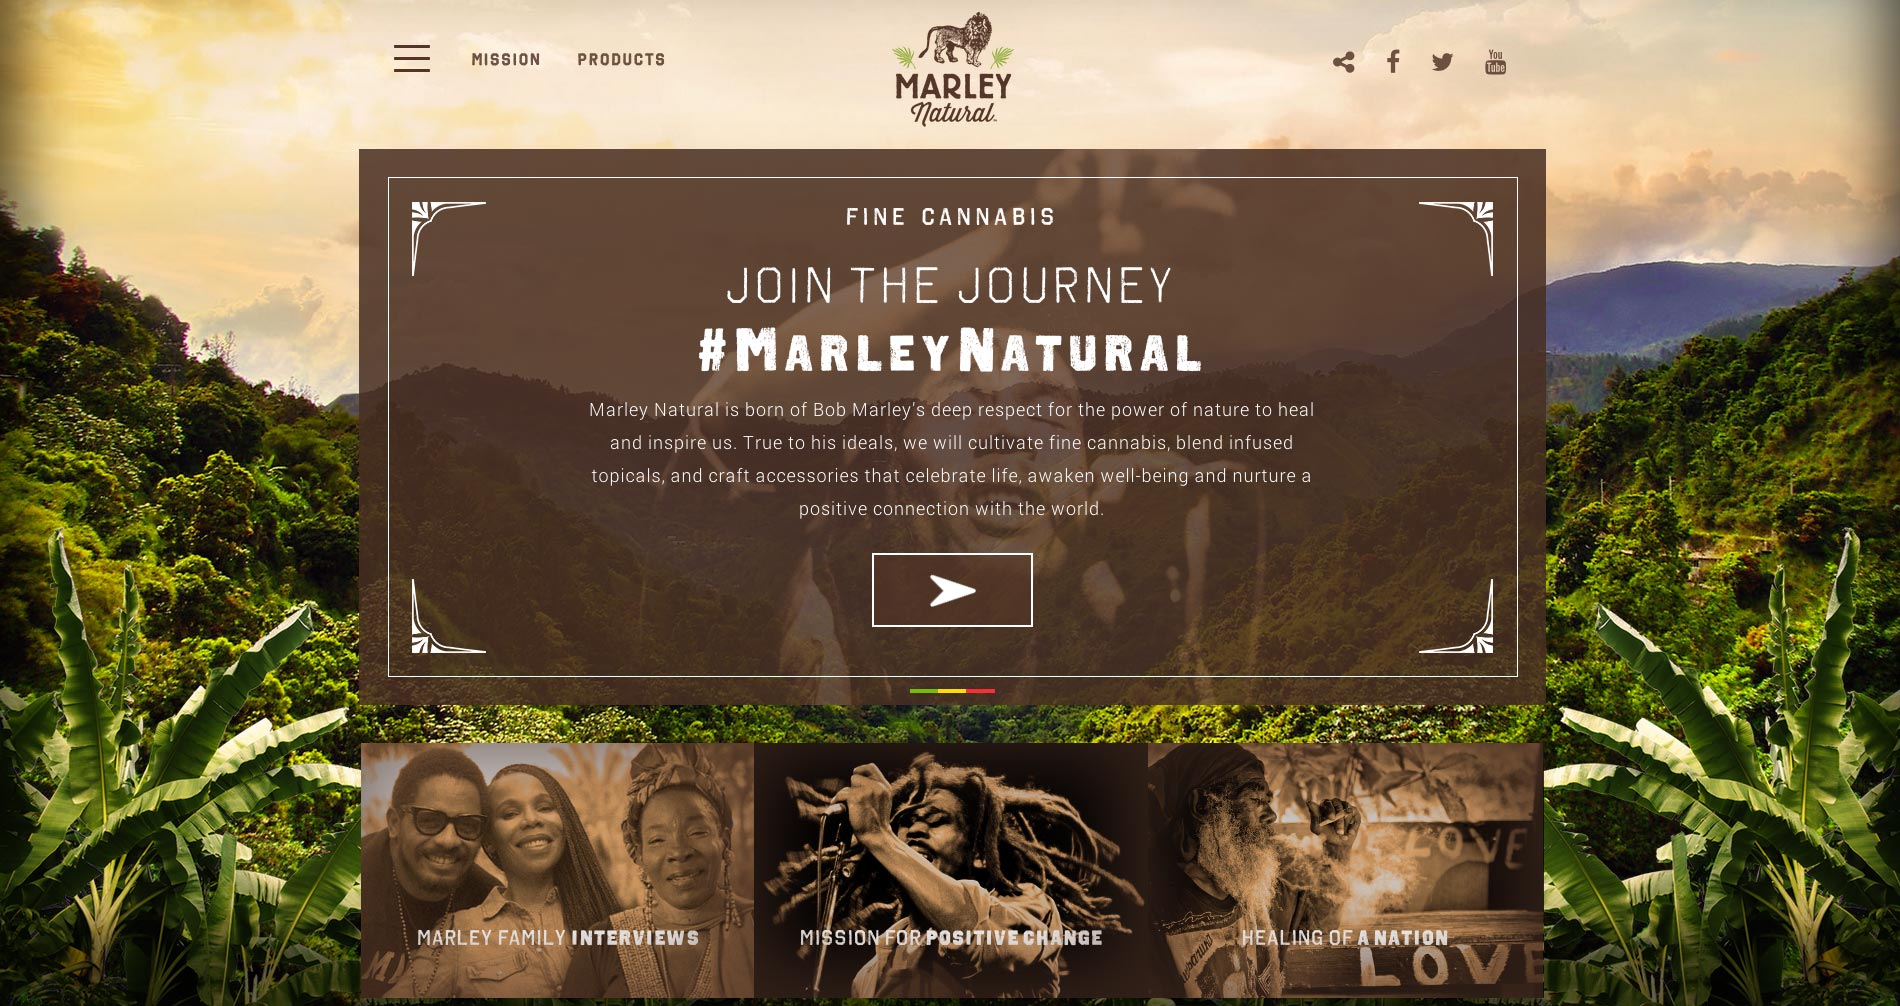 PHOTO: The "Marley Natural" website.